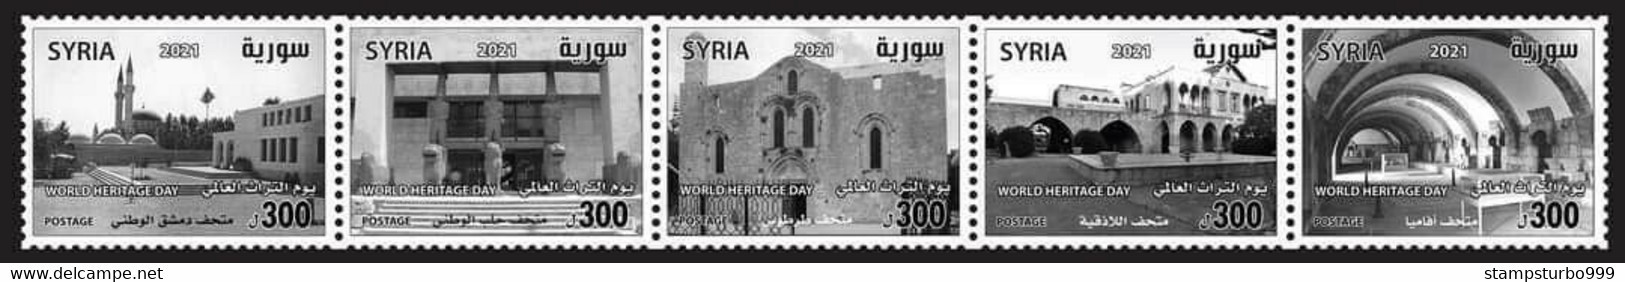 Syrie, Syrien, Syria 2021 New Issued World Heritage Day Set, MNH** - Syrie